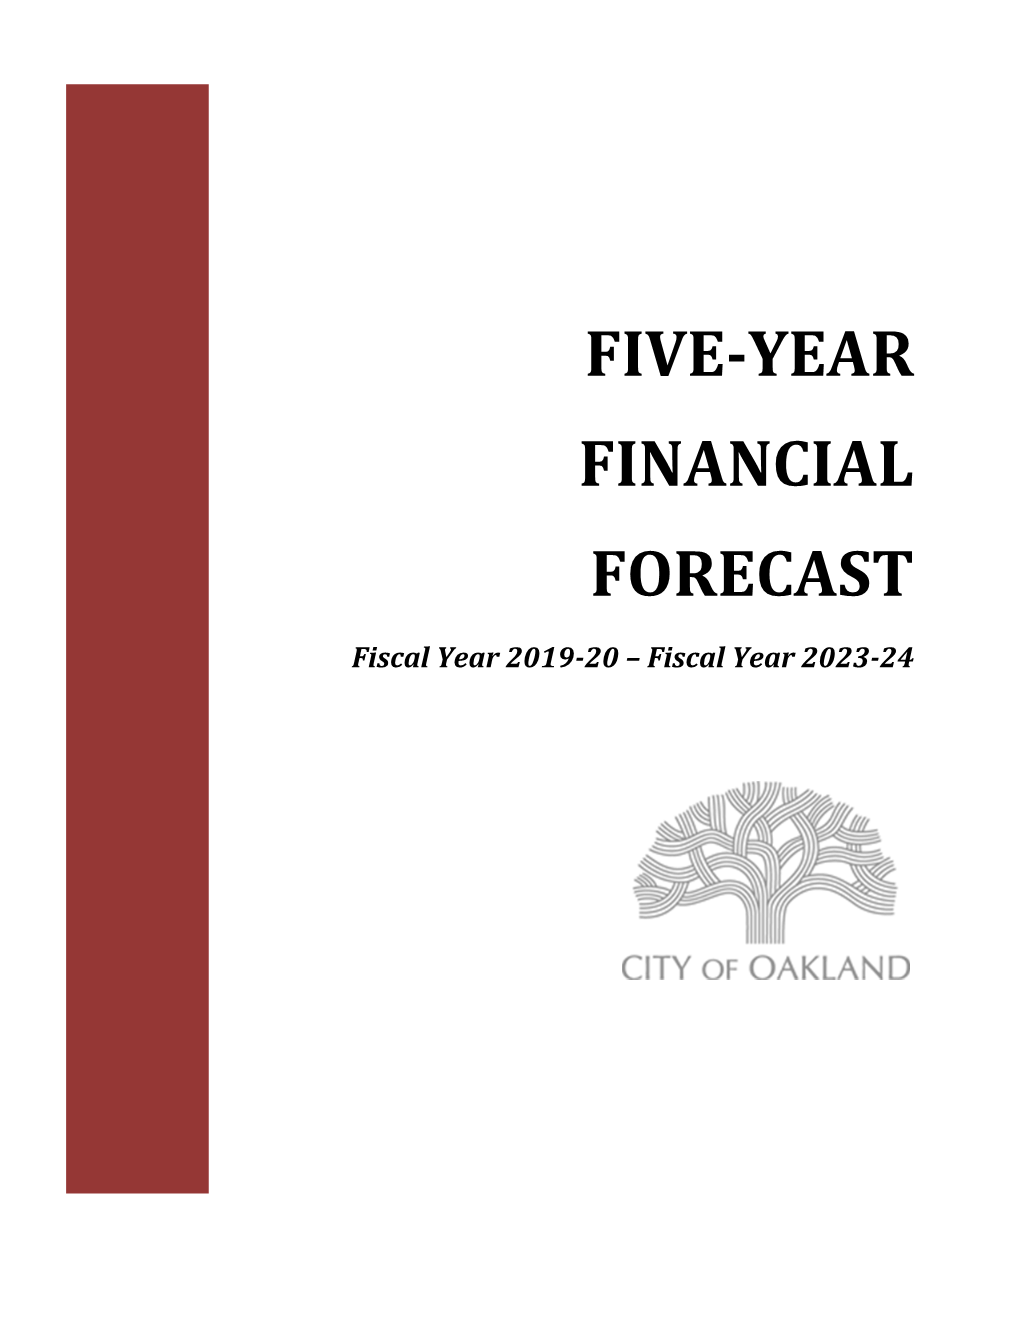 2019-20 to 2023-24 Five-Year Financial Forecast